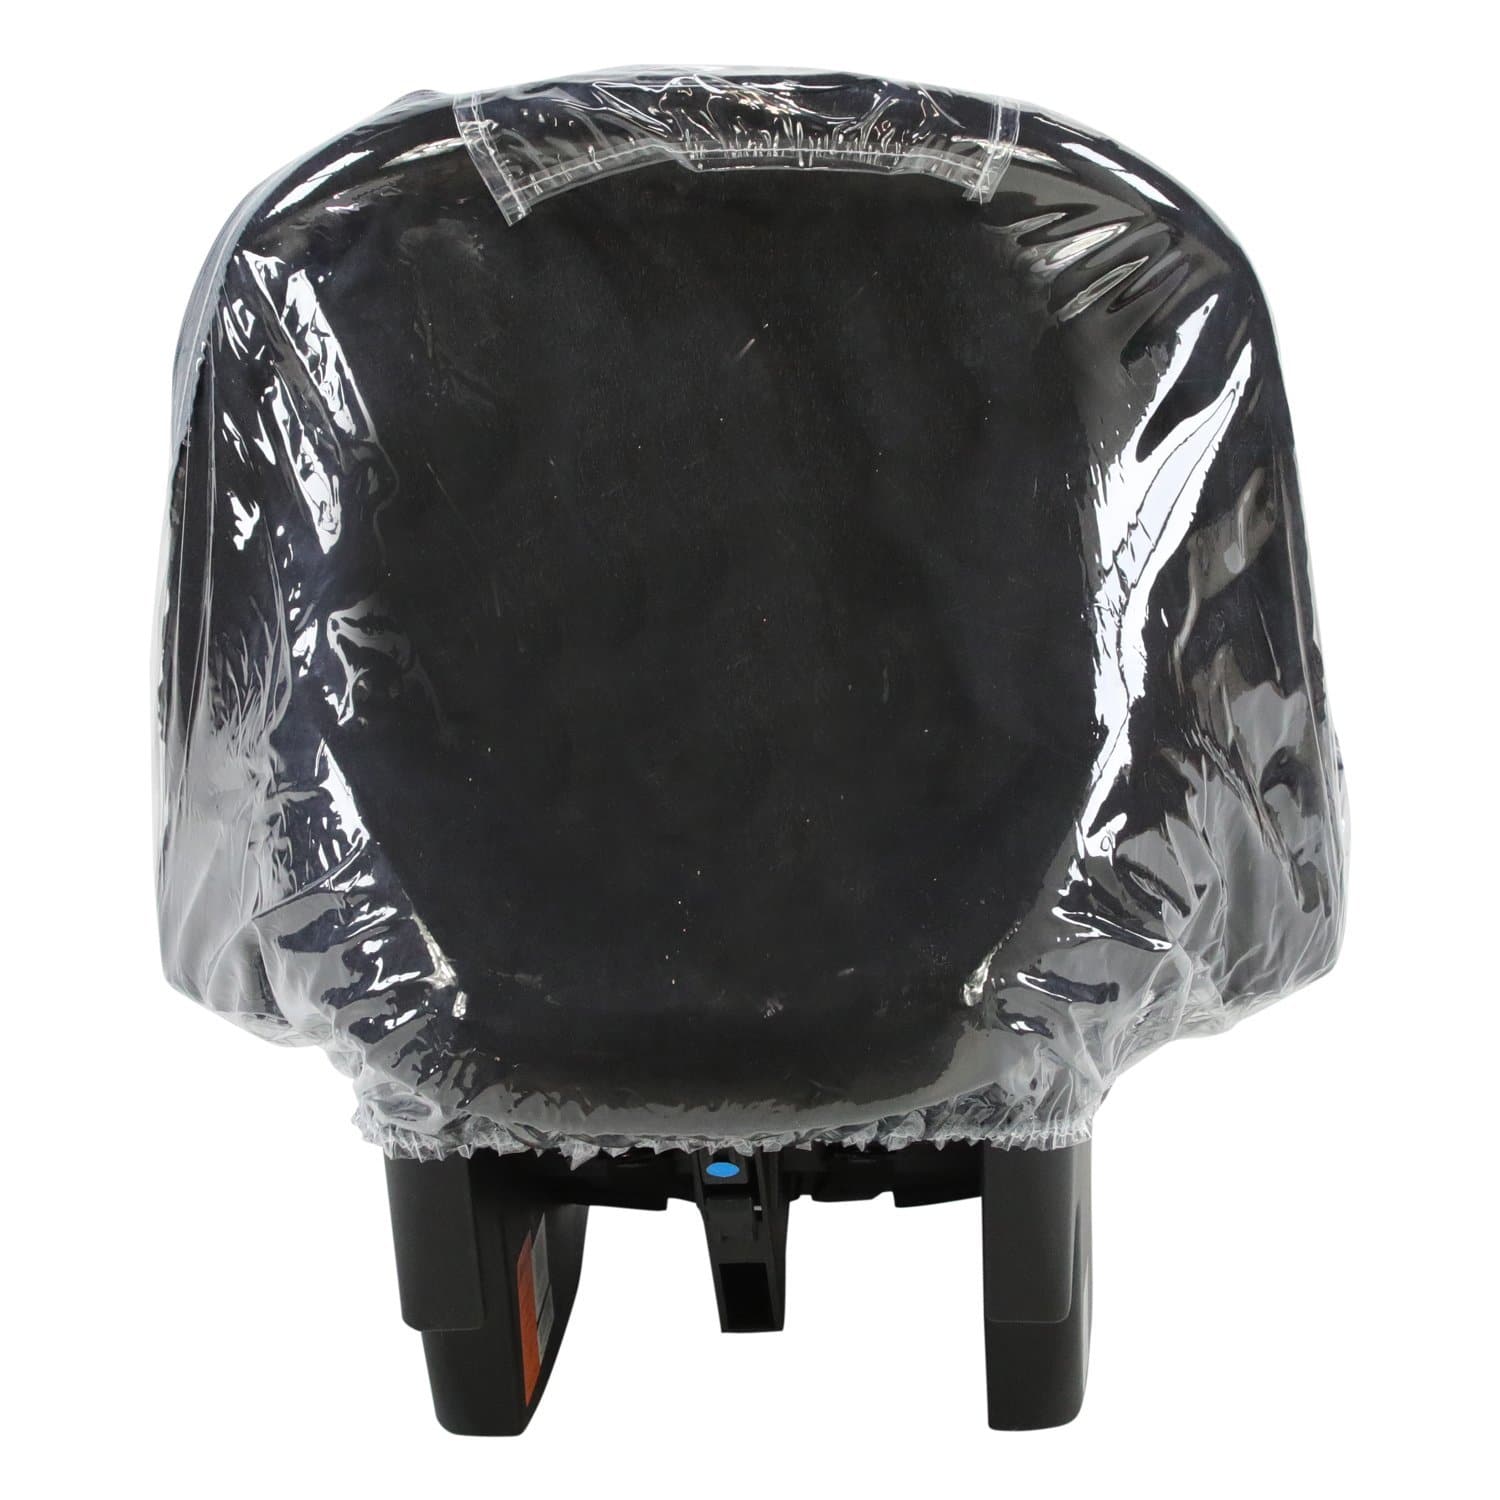 Car Seat Raincover Compatible With Cybex -  | For Your Little One